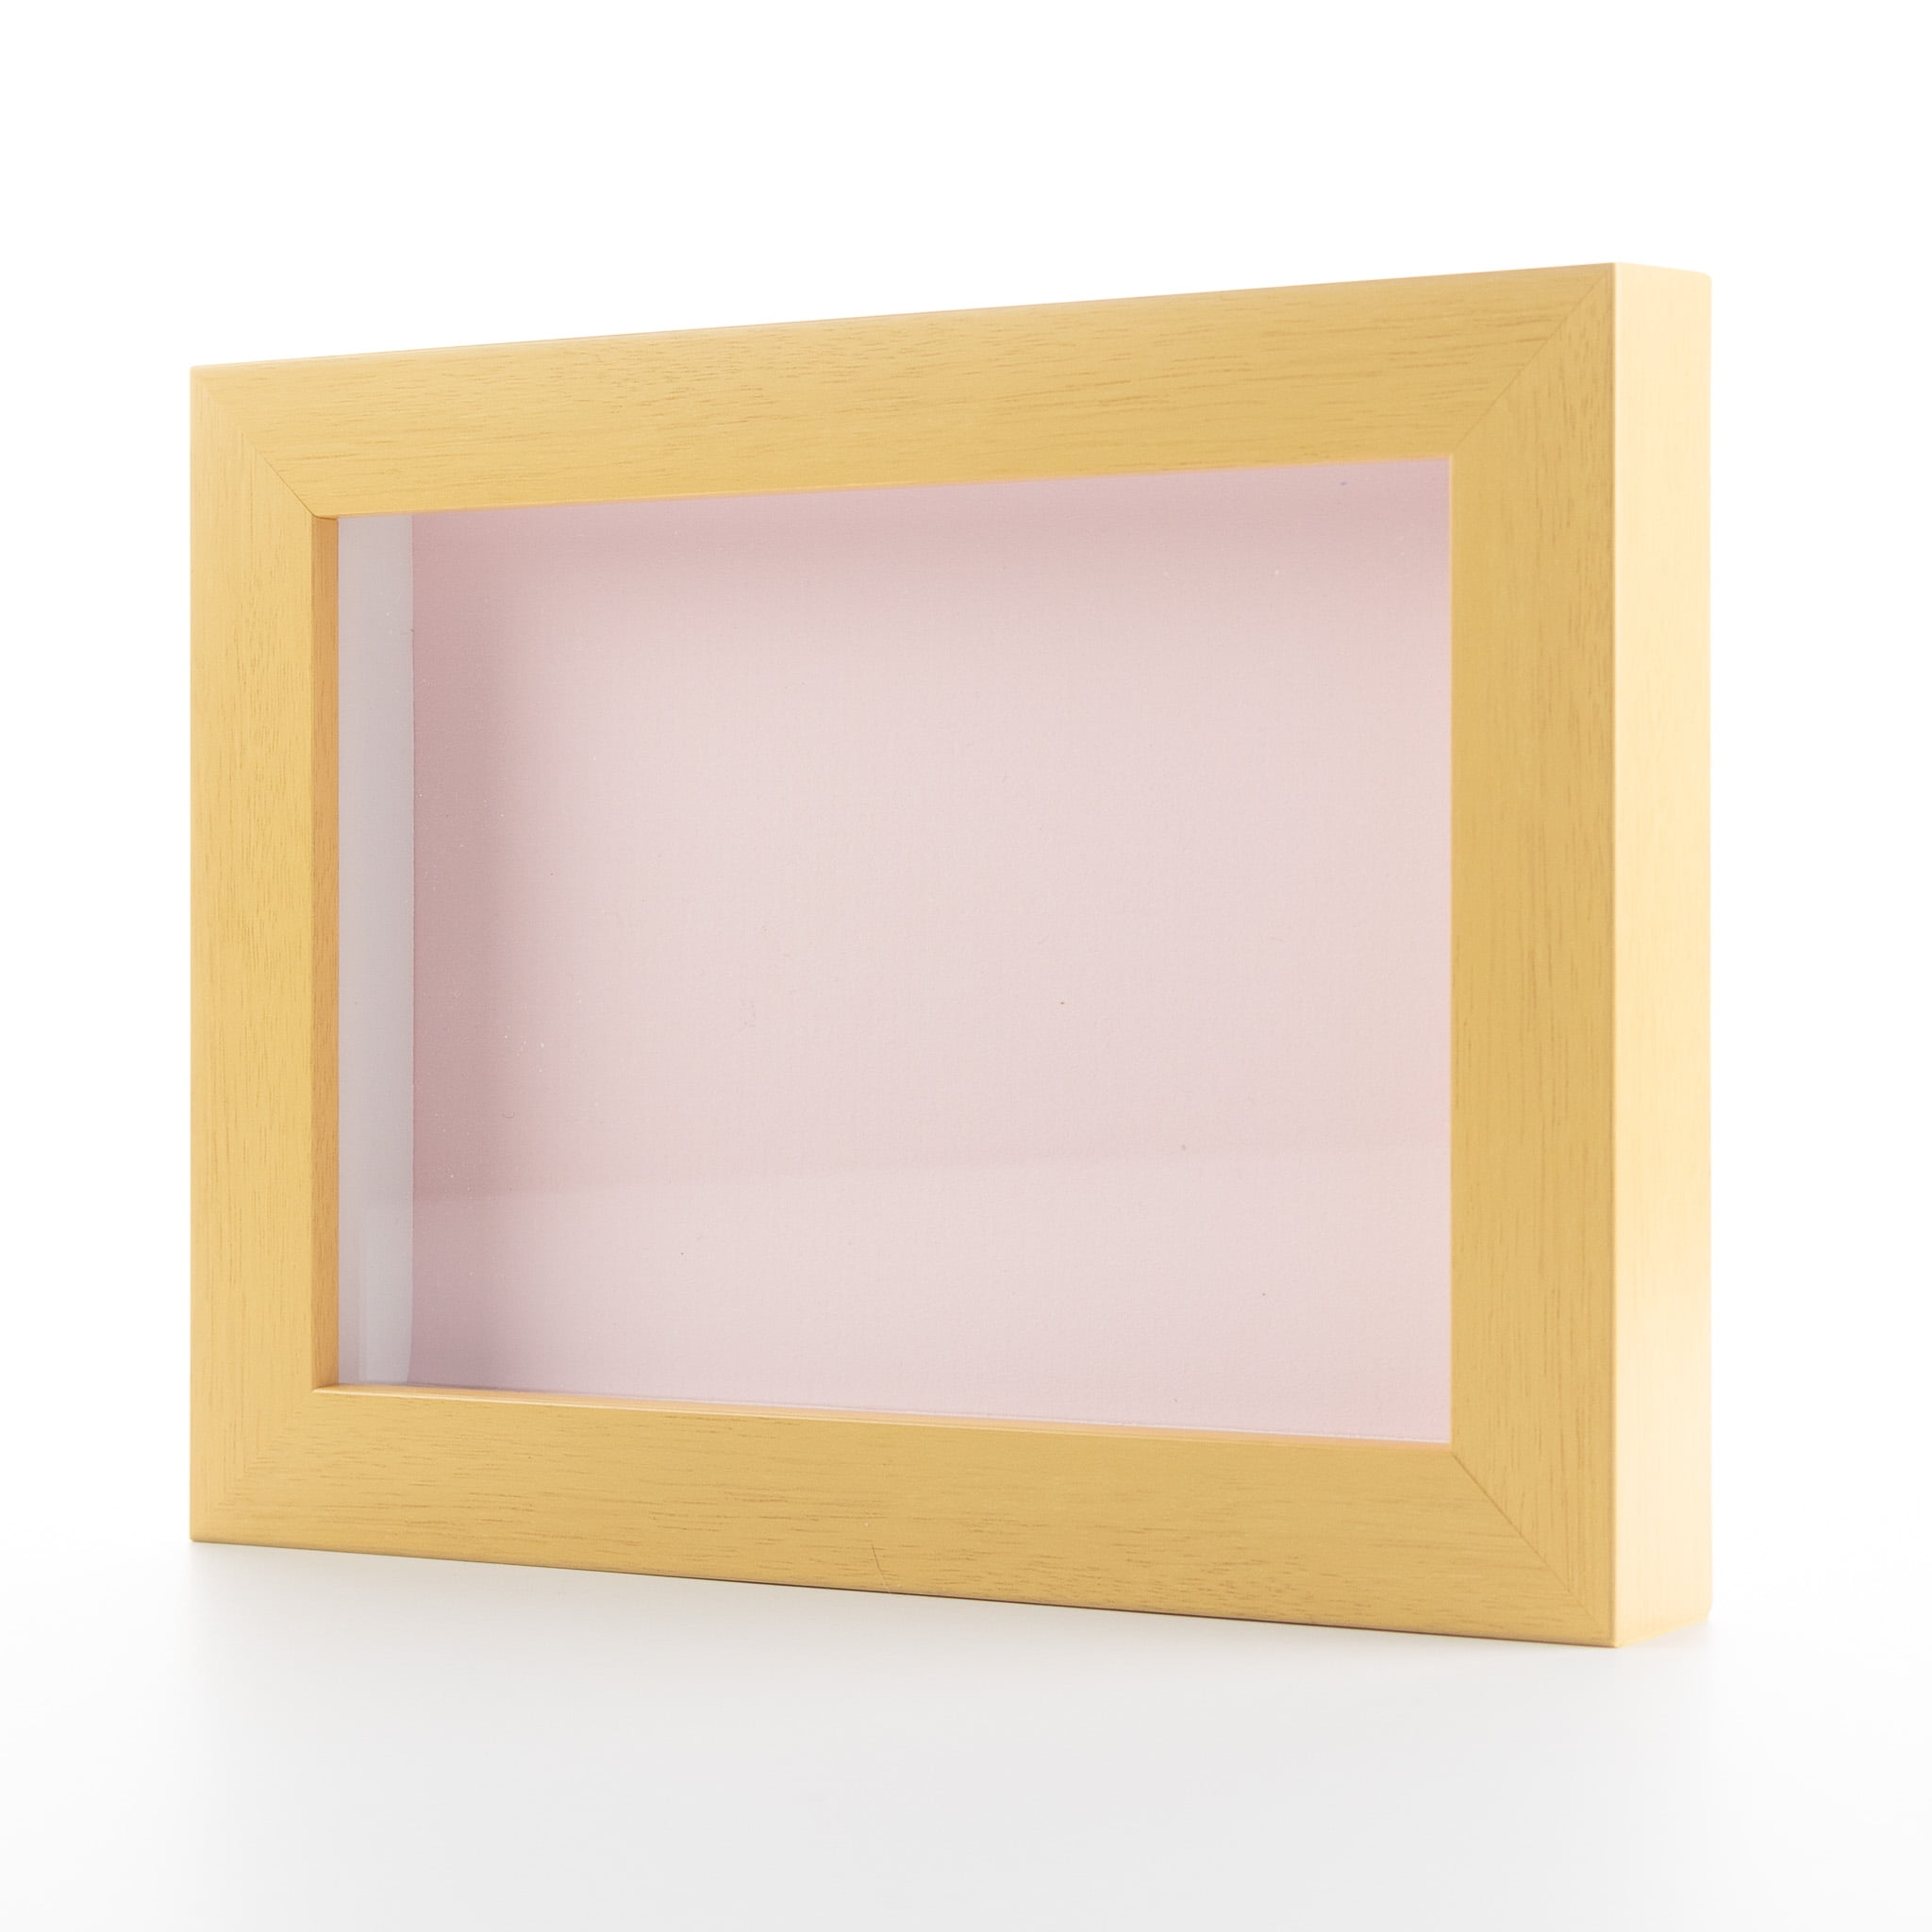 8x8 Shadow Box Frame Painted Black Real Wood with A Navy Acid-Free Backing | 3/4 inch of Usuable Depth, Size: 8 x 8, Blue